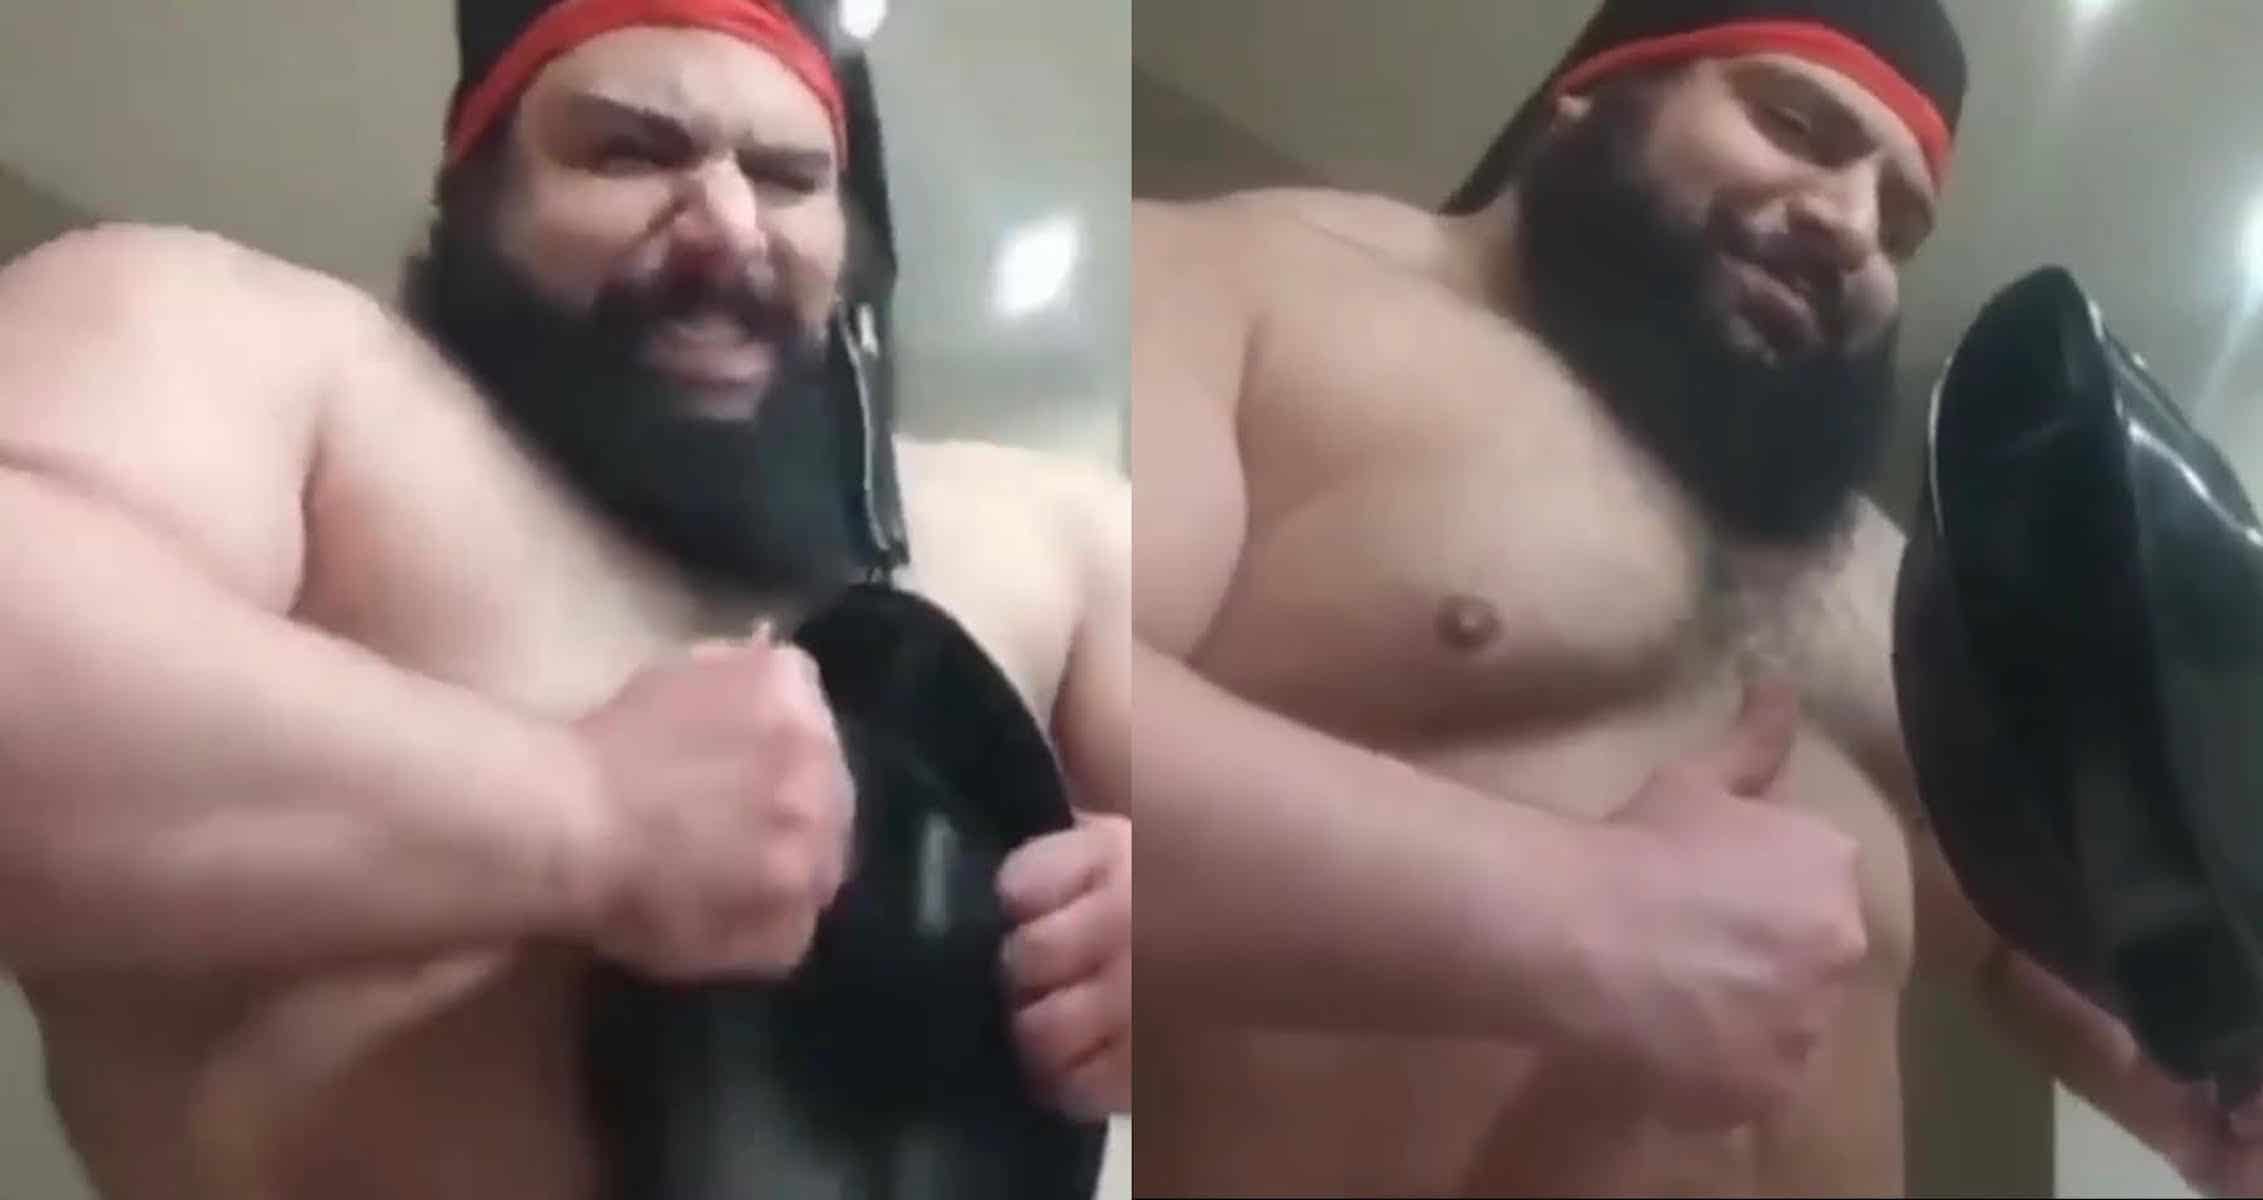 Iranian Hulk Shows Crazy Strength By Bending Frying Pan With Bare Hands